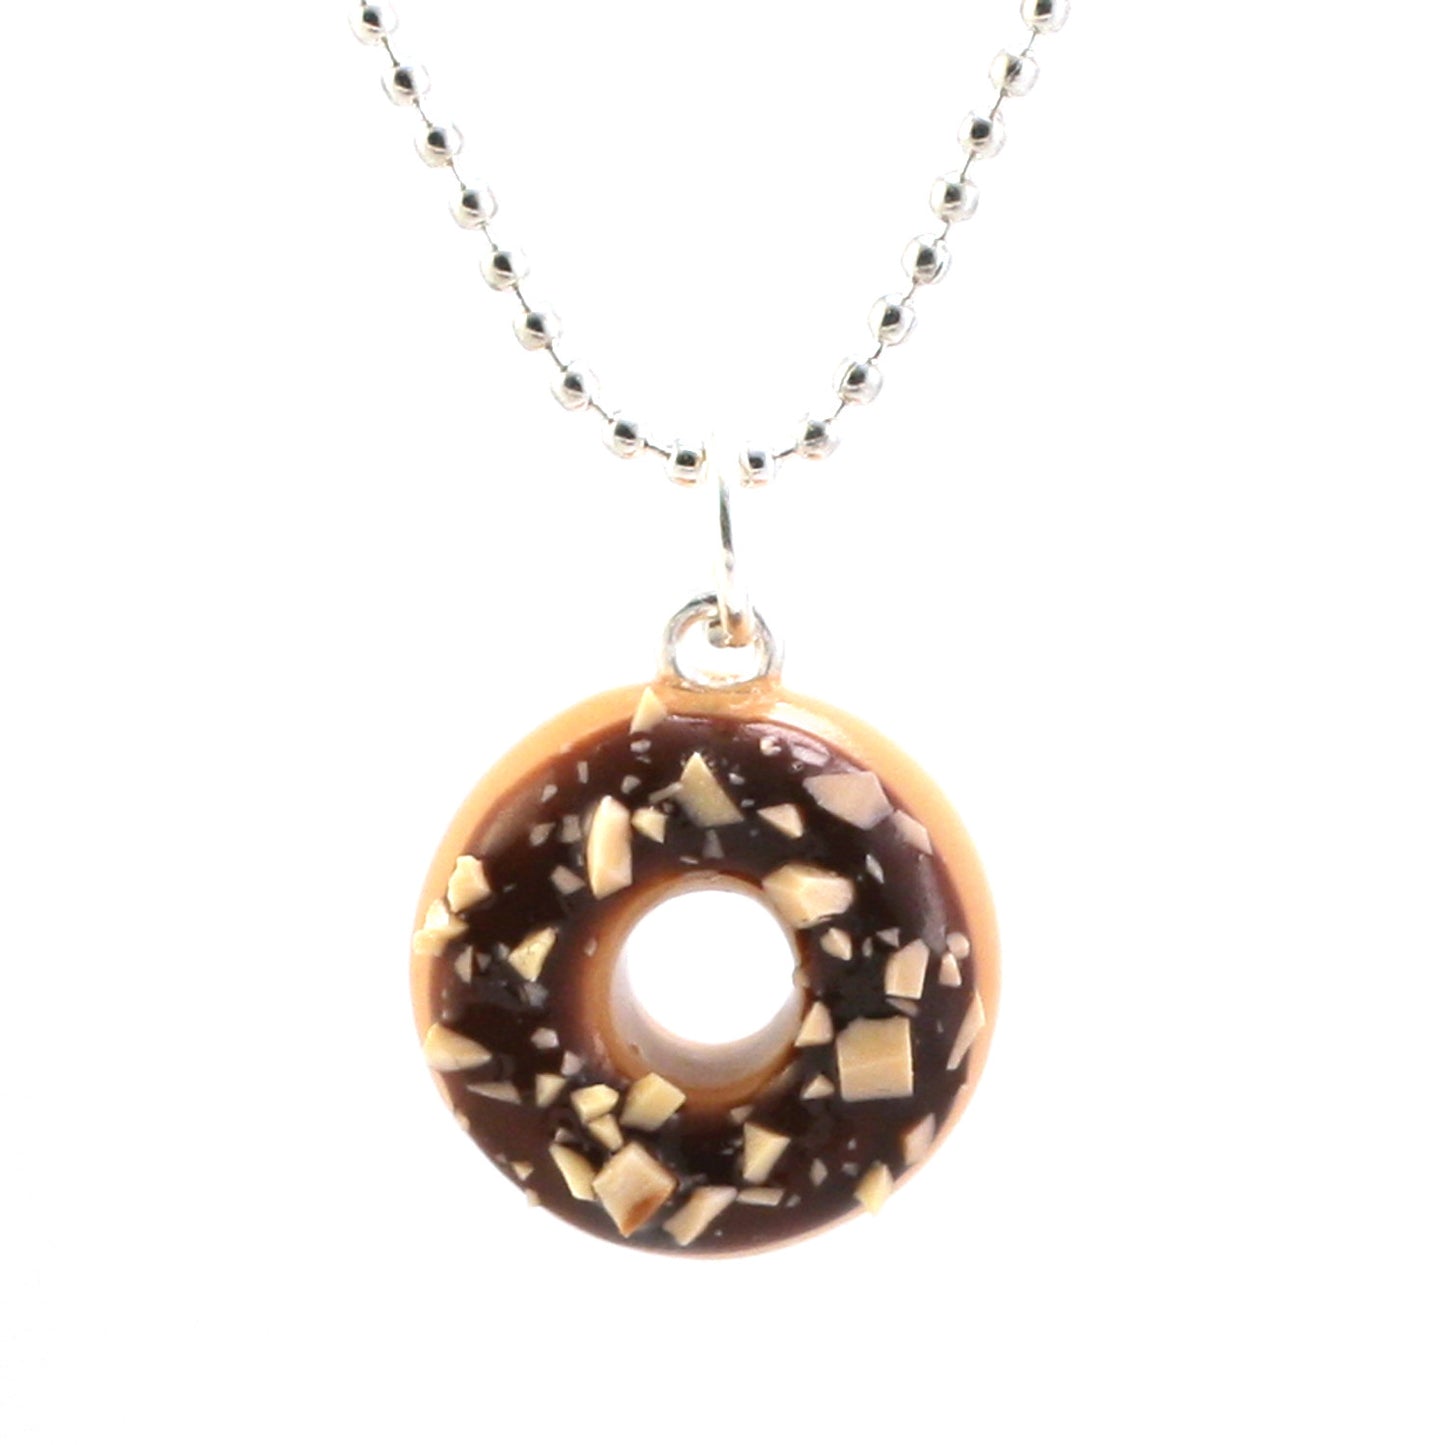 Scented Chocolate Nut Donut Necklace - Tiny Hands
 - 1